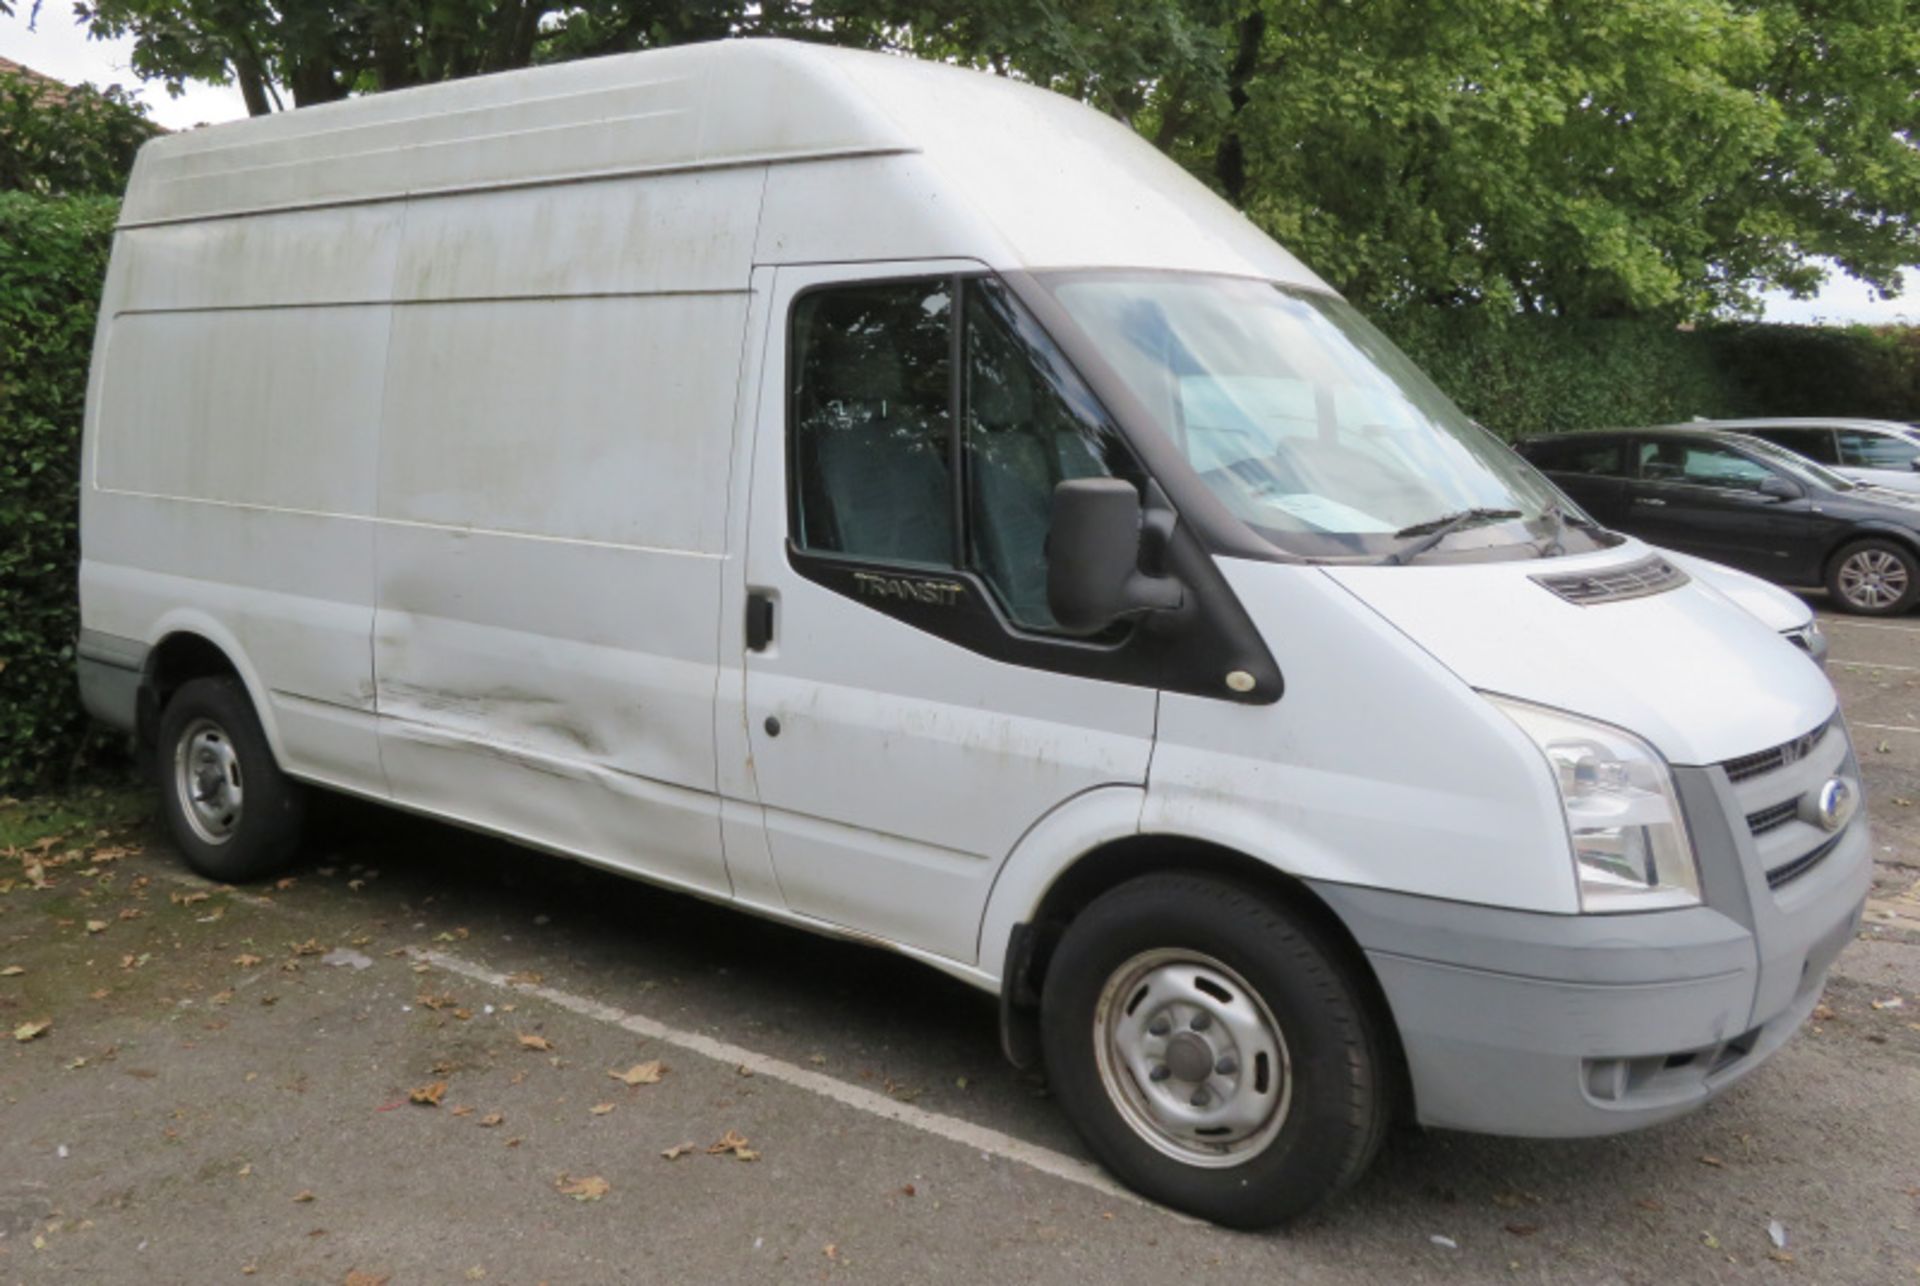 Ford Transit High Van Roof, Petrol, Mileage 33357 mile, Air conditioning, Runs & drives well on